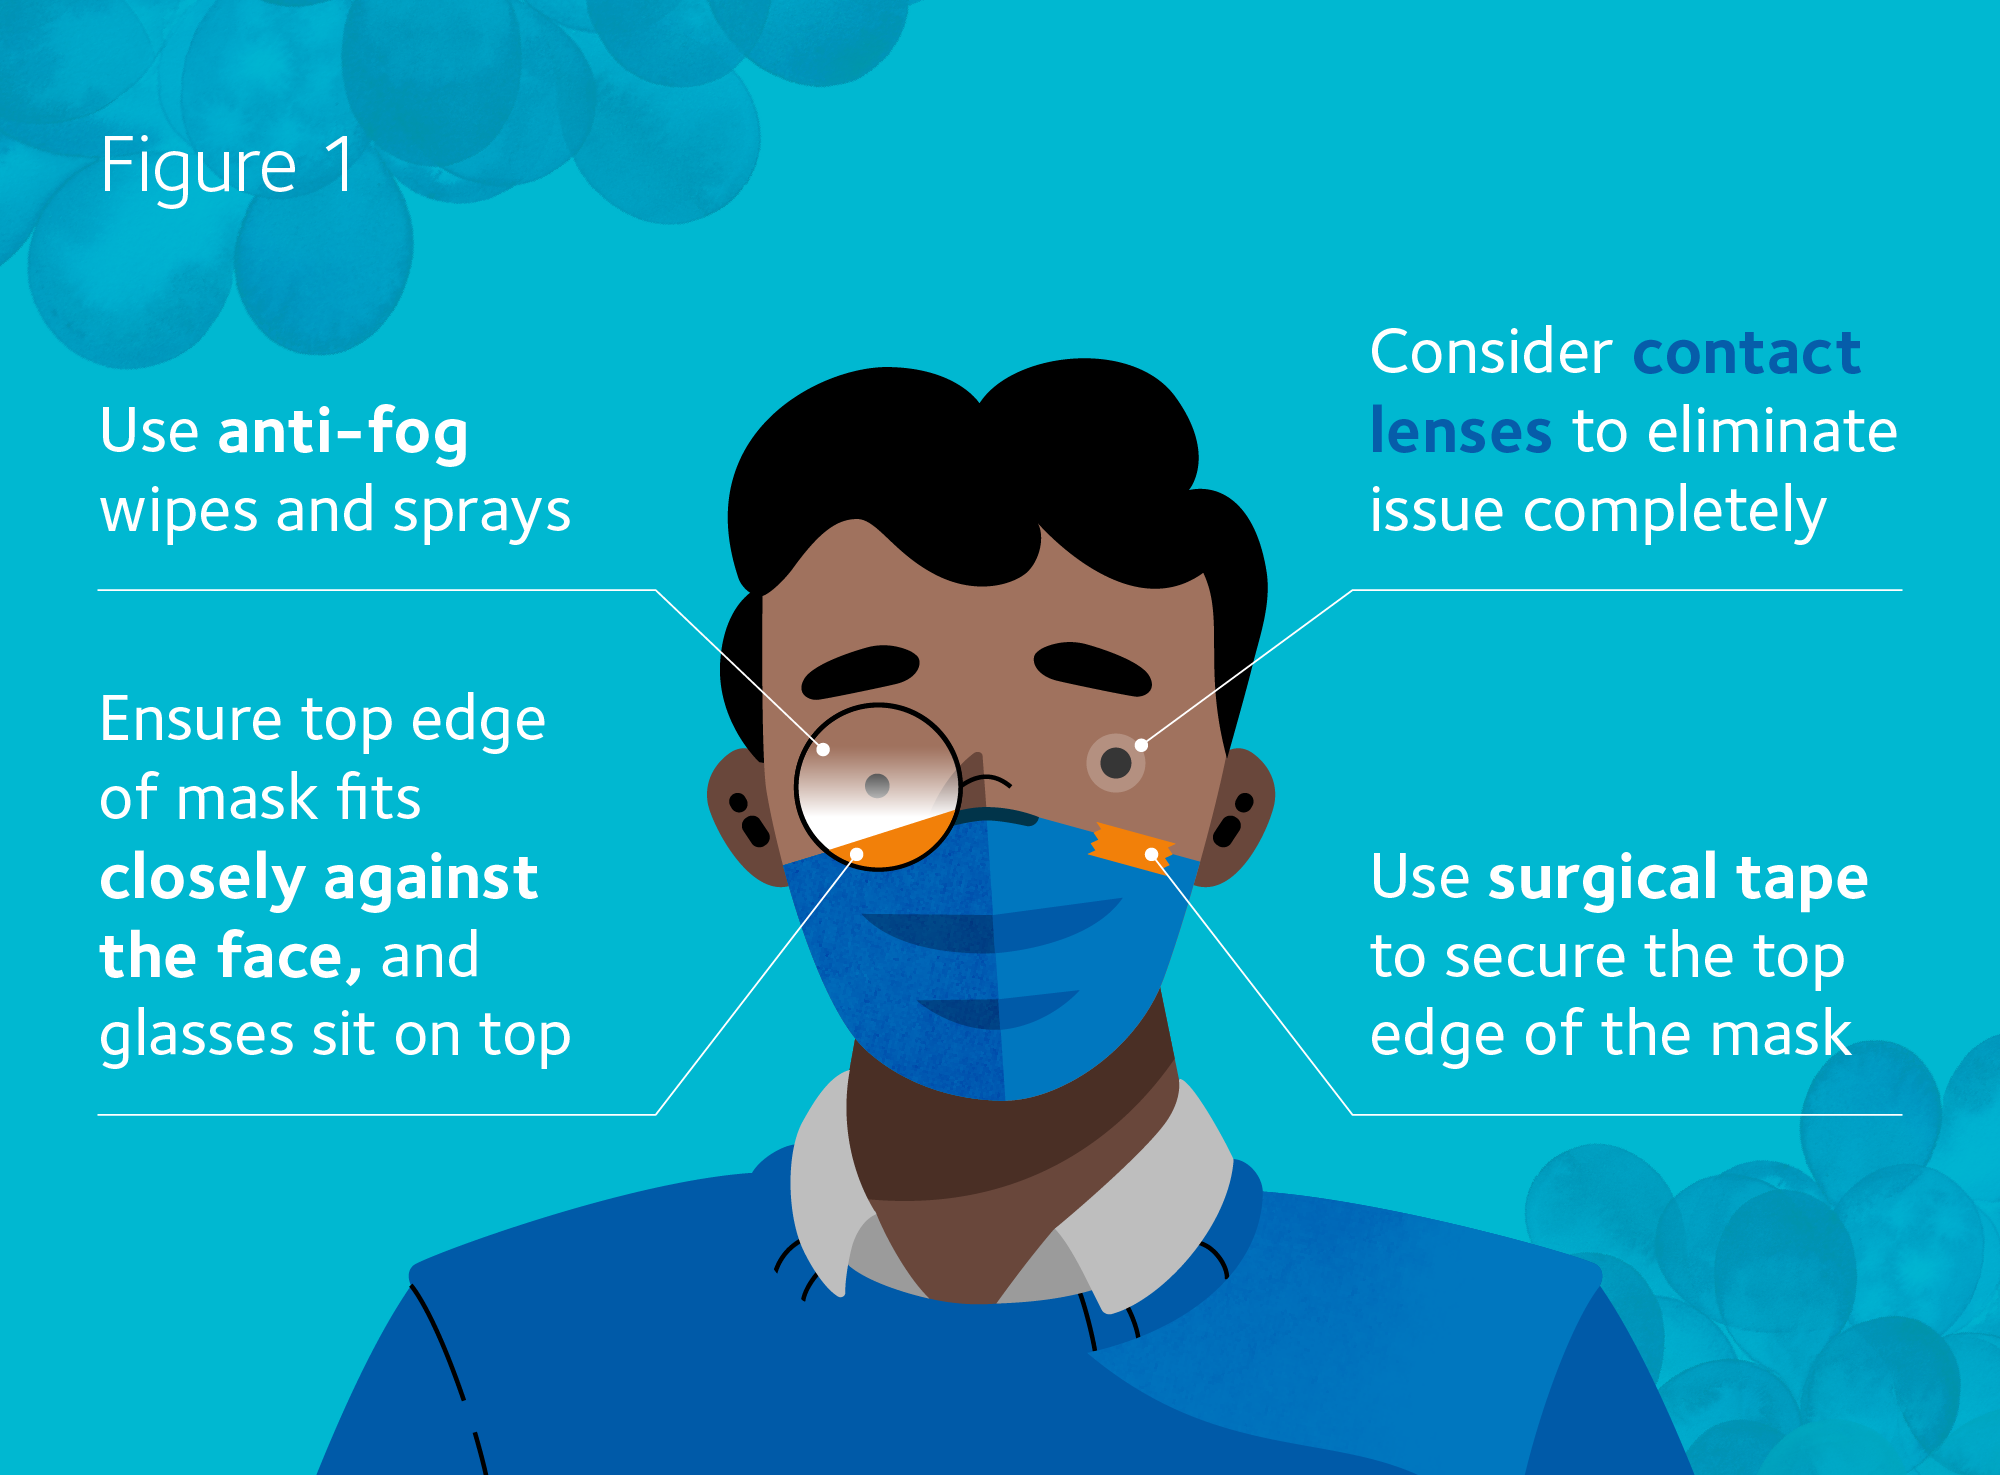 Use anti-fog wipes and sprays - Ensure top edge of mask fits closely against face, and glasses fit on top - Consider contact lenses to eliminate issue completely - Use surgical tape to secure the top edge of the mask